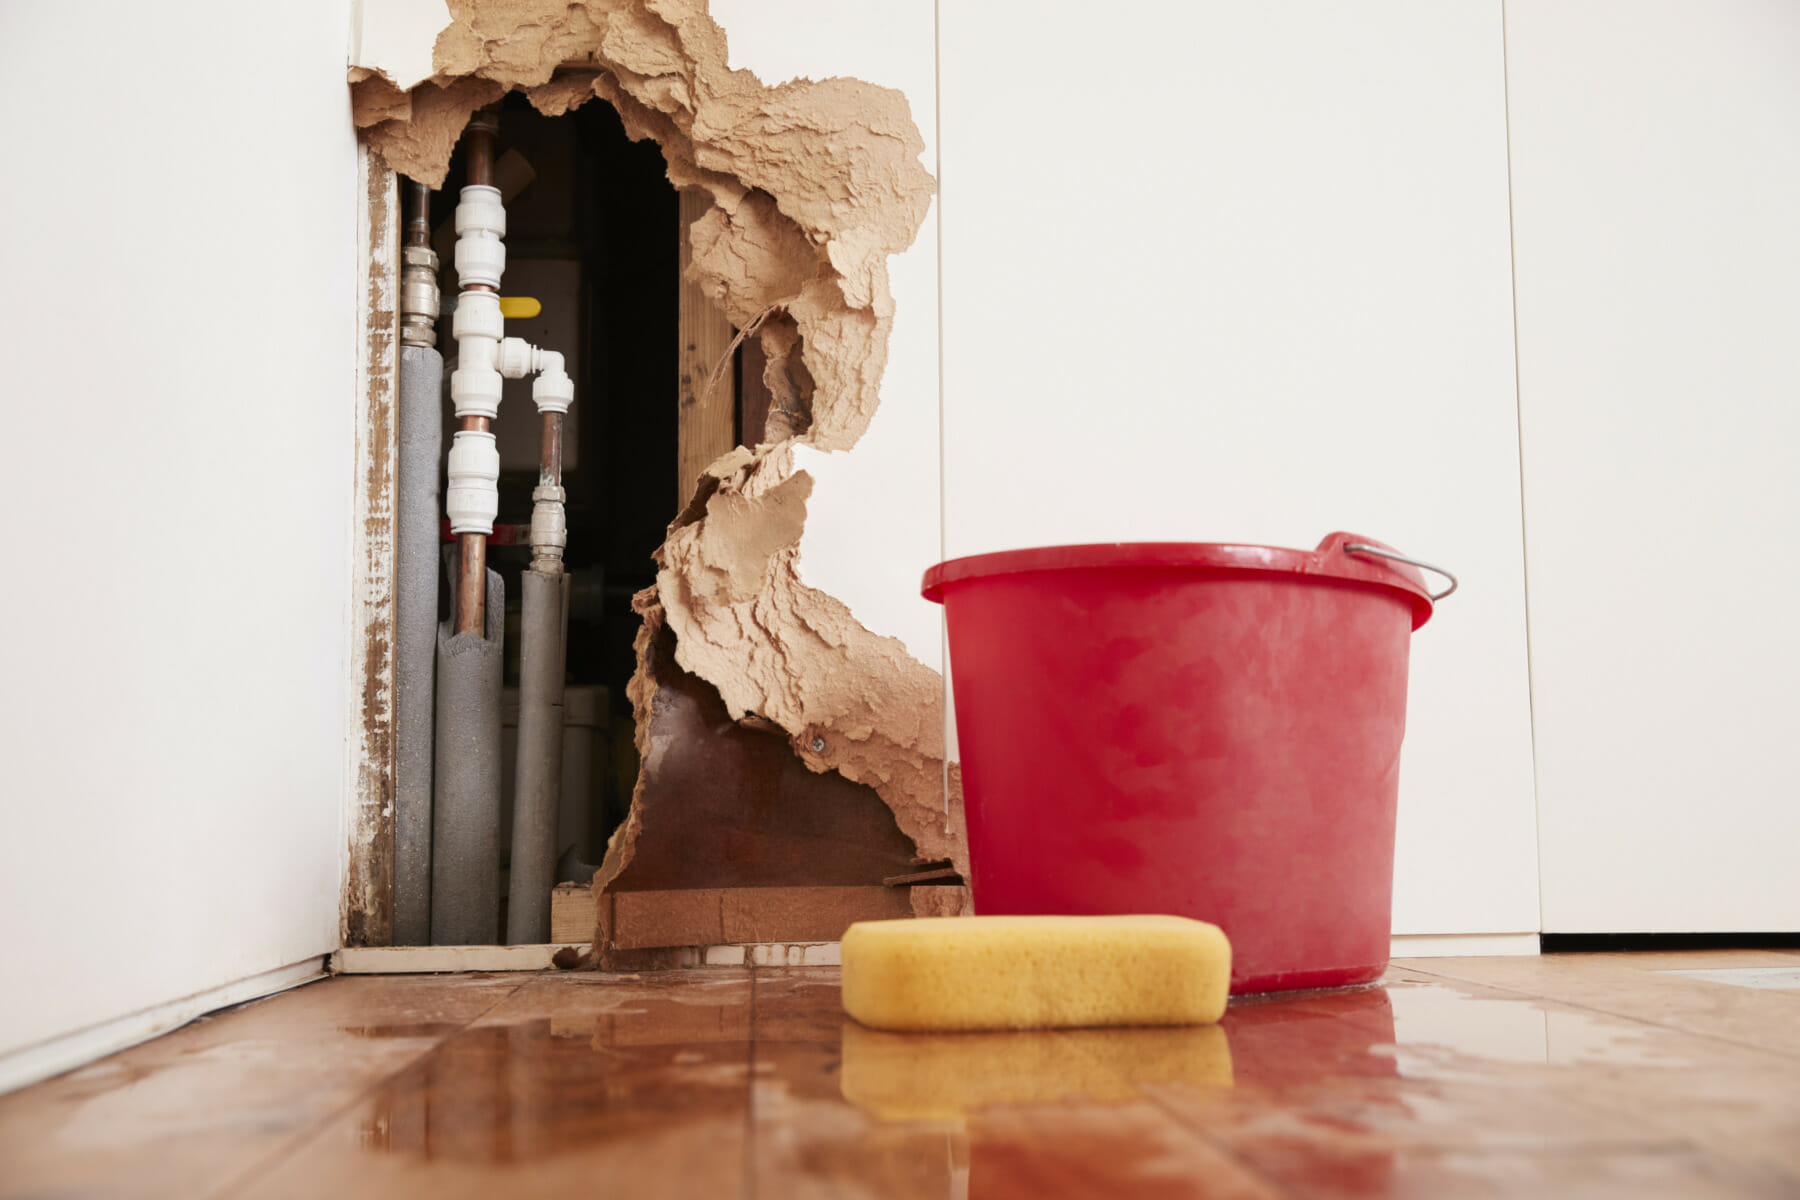 Water Damage Restoration - Bucket and Sponge next to Wall with Water Damage